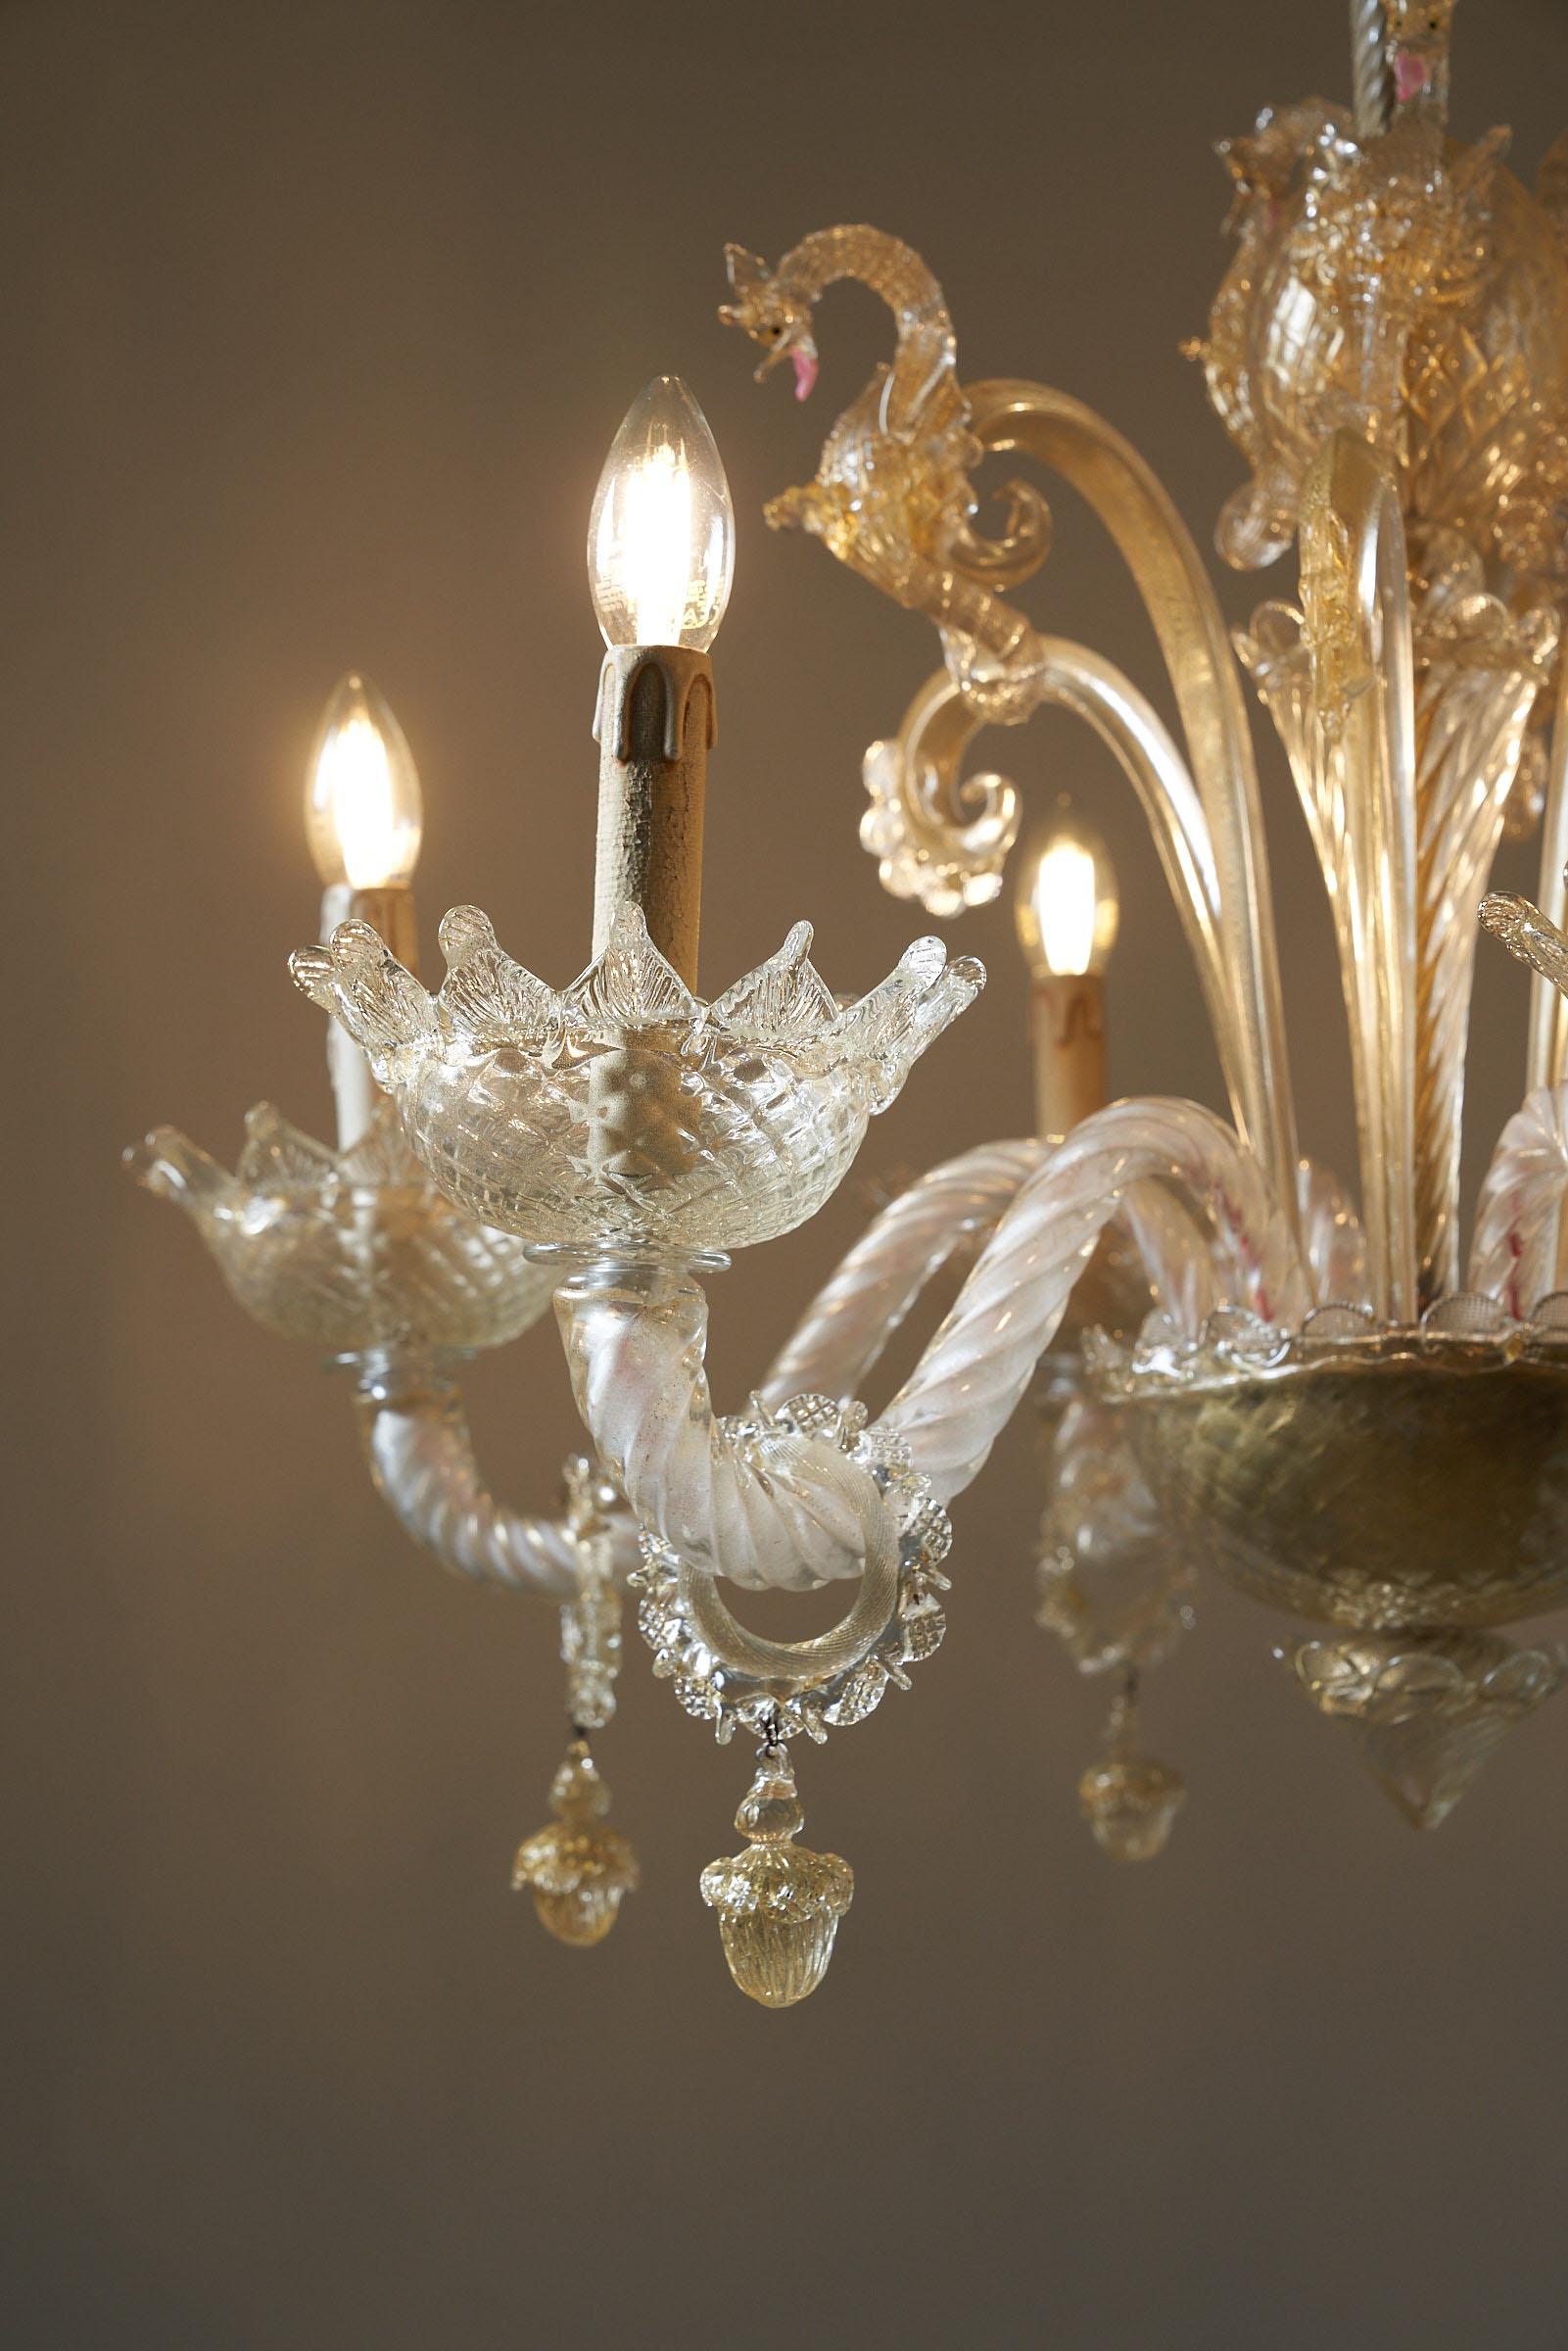 Hand-Crafted Barovier & Toso Murano Glass Sea Horse Chandelier, Circa 1900 For Sale